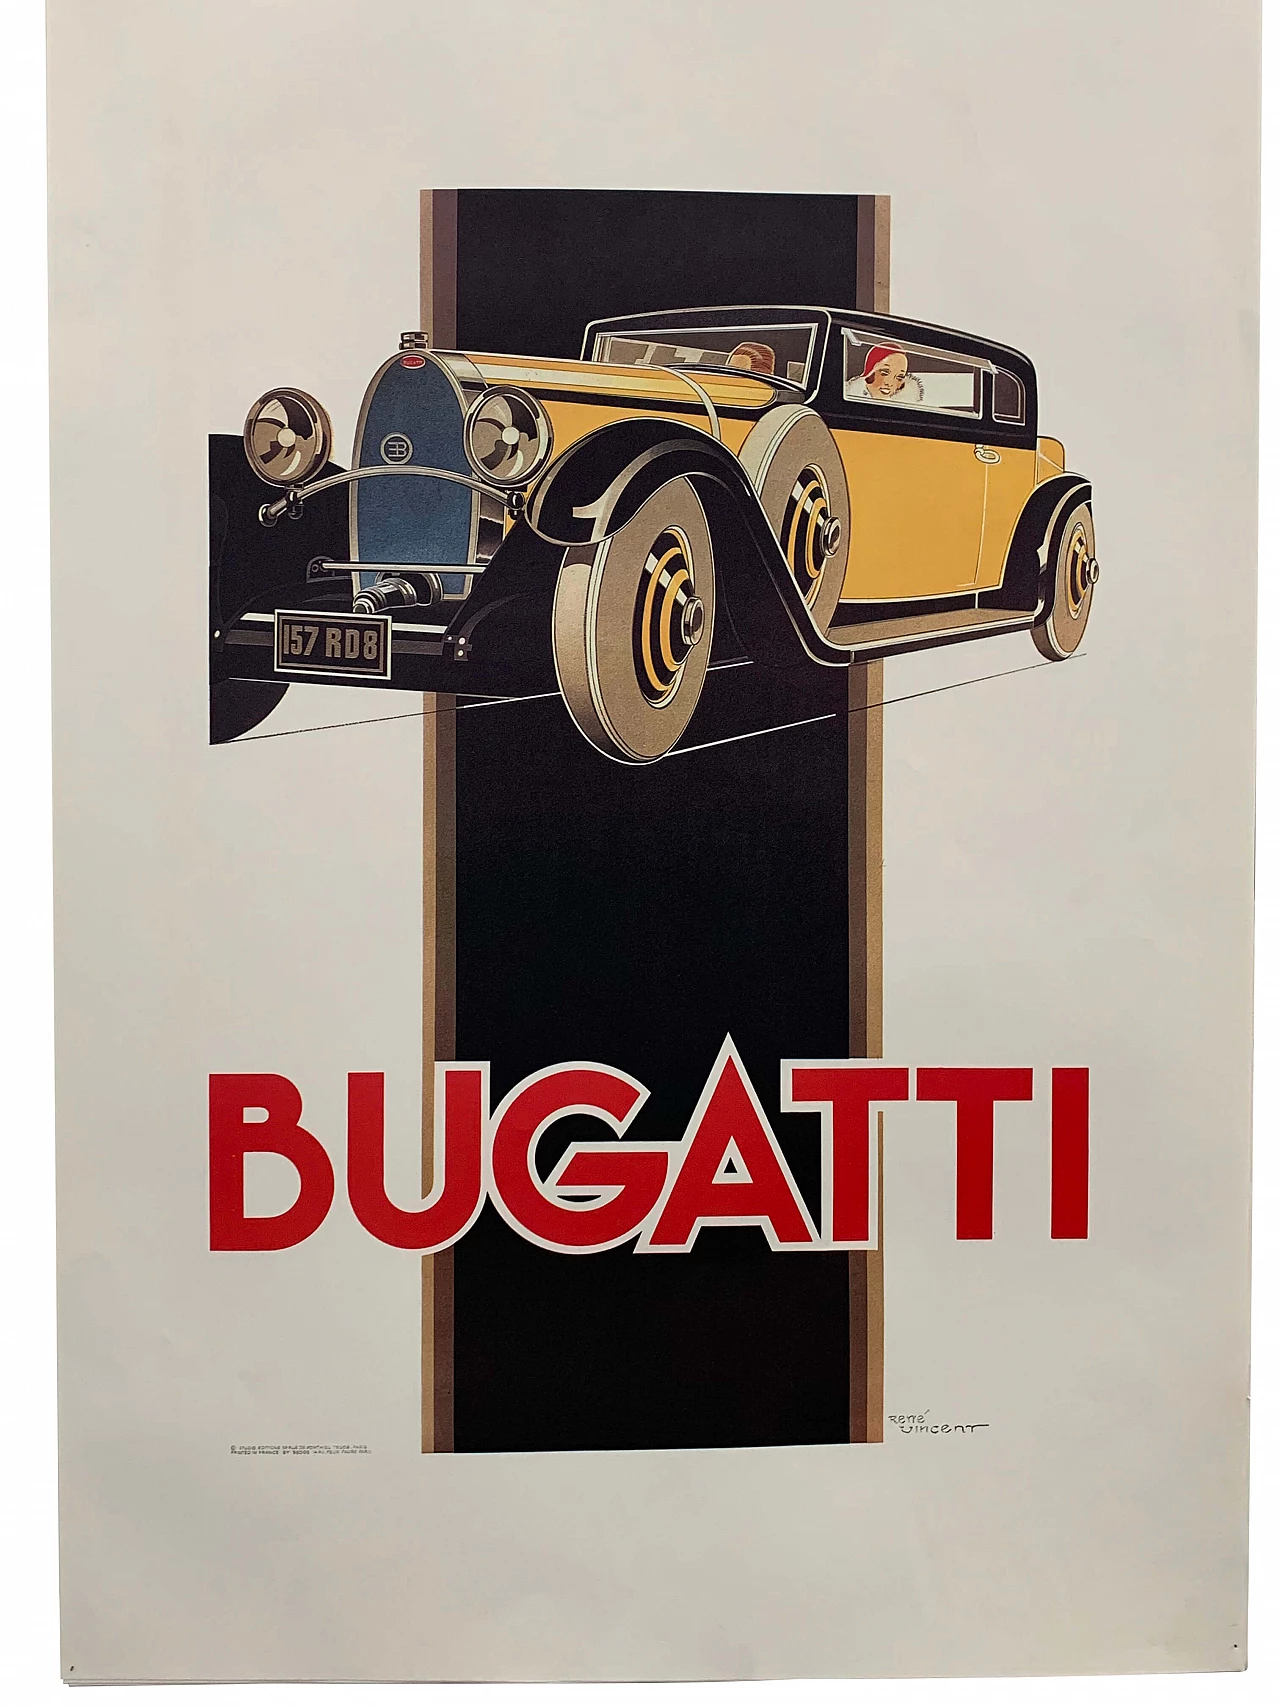 Bugatti Poster by Rene Vincent for Bedos Paris, 1960s 1106503